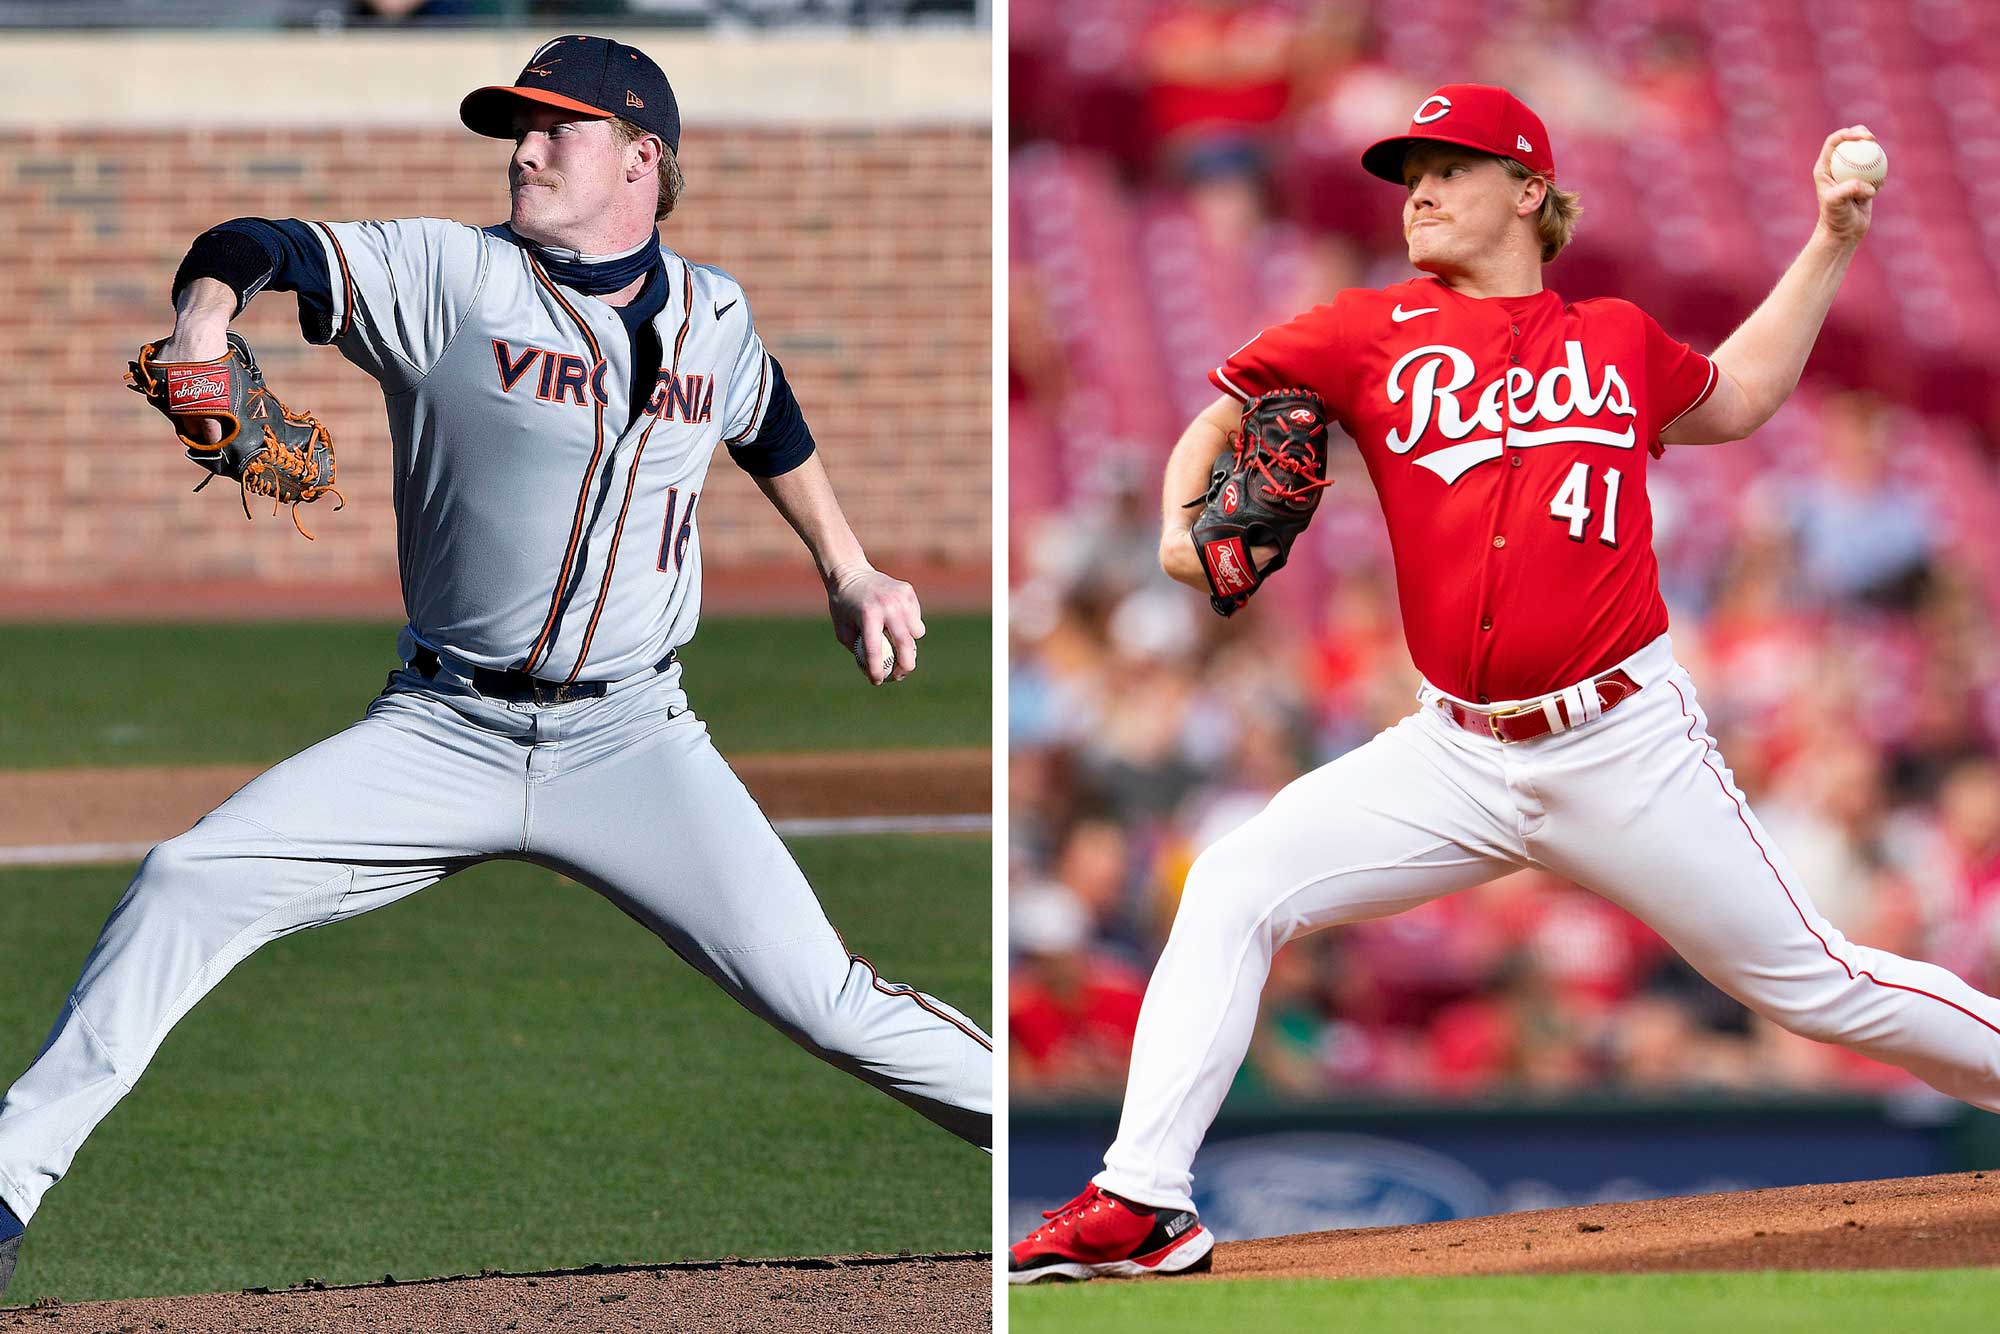 Andrew Abbott pitching at UVA, left, Andrew Abbott pitching for the Cincinnati Reds, right